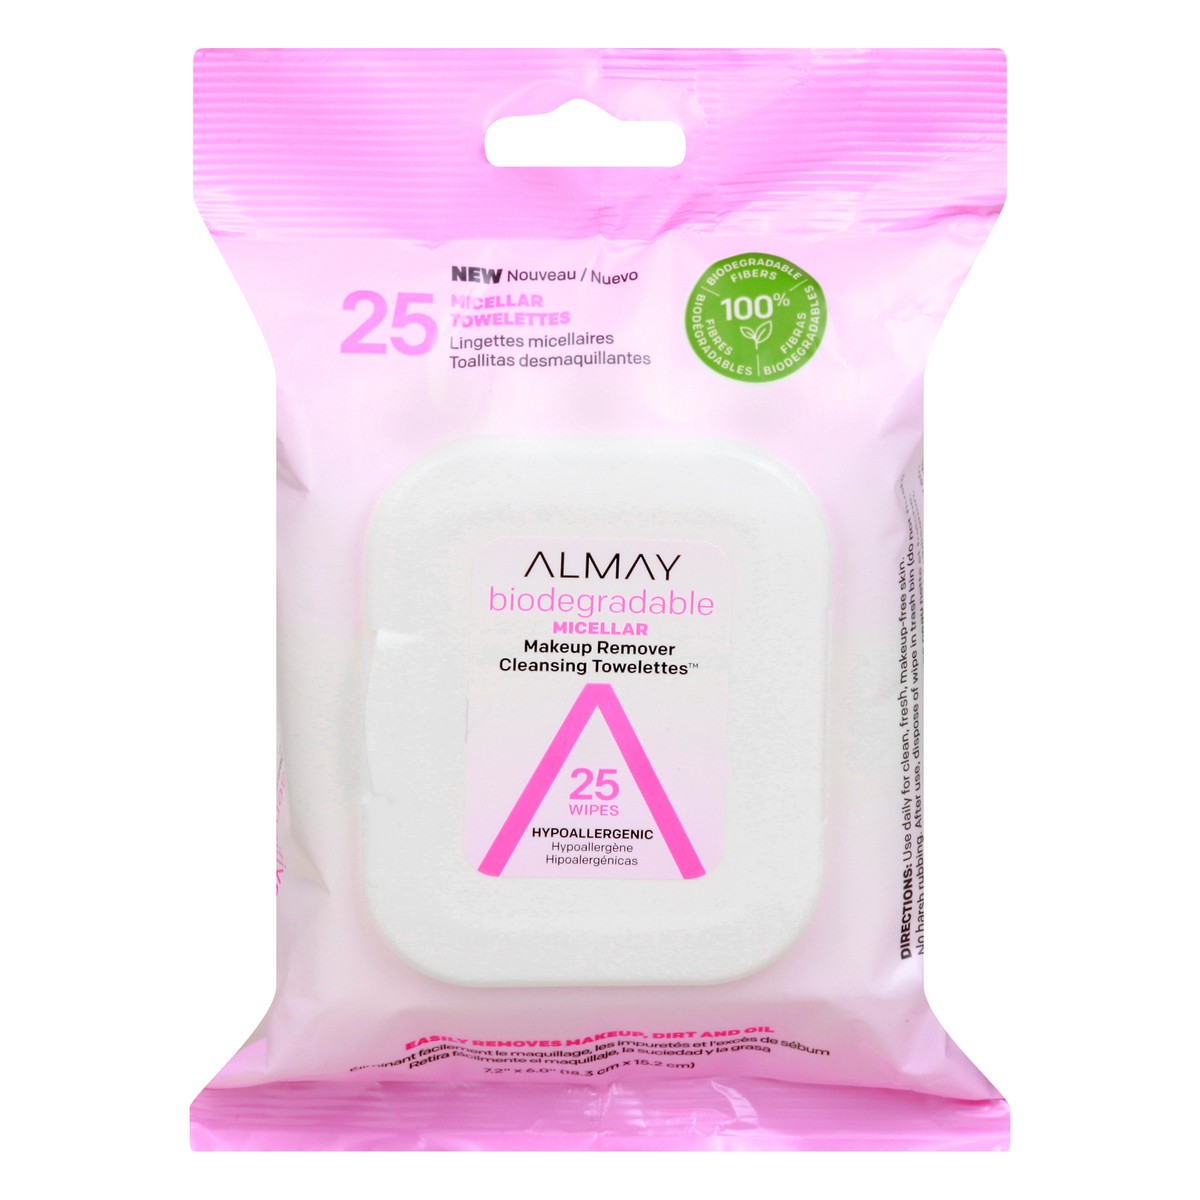 slide 1 of 9, Almay Biodegradable Micellar Makeup Remover Cleansing Towelettes, 25 ct